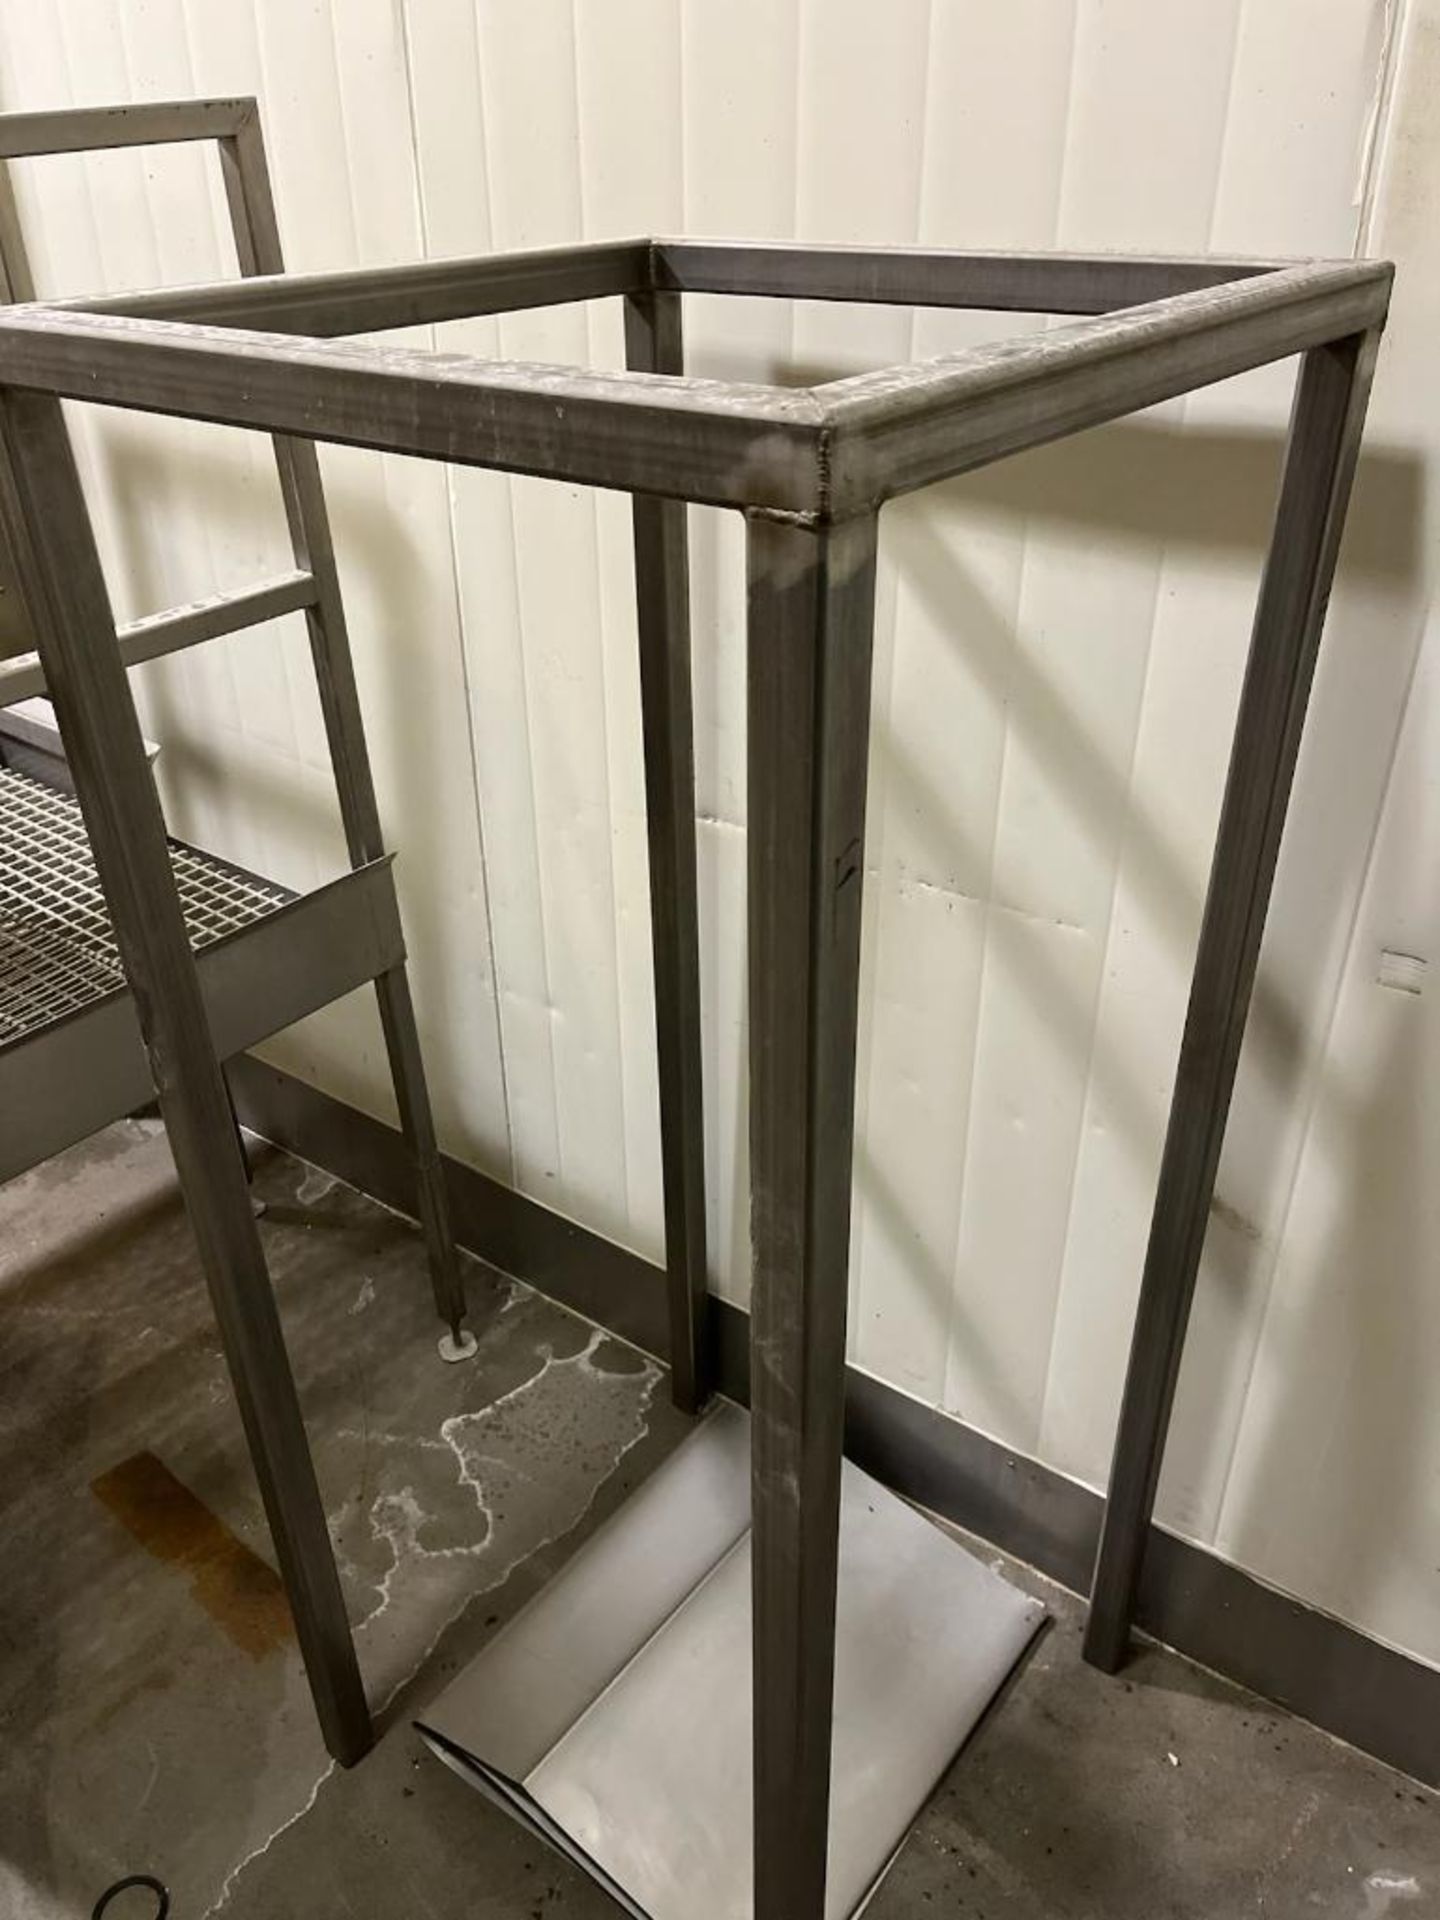 S/S Framed Platform with Handrail, Dimensions = 4' x 4' and S/S Frame, Dimensions= 2' x 2' x 5' - Image 2 of 2